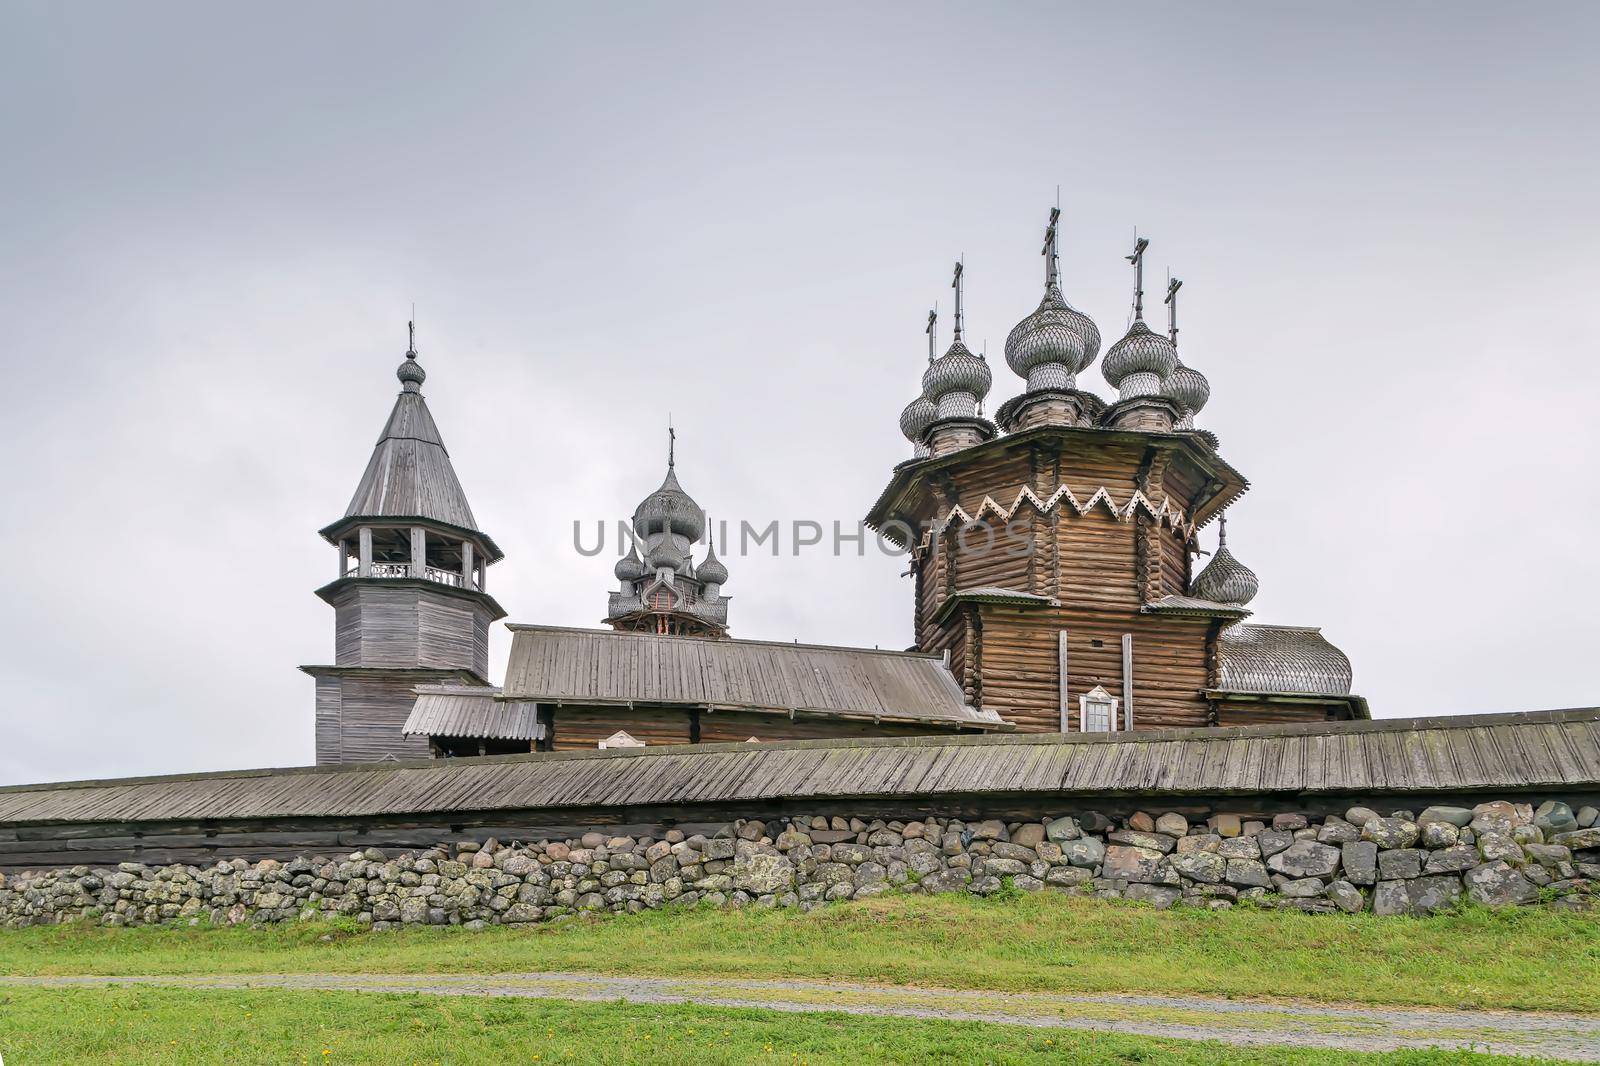 Historical site dating from the 17th century on Kizhi island, Russia. Church of the Intercession of the Virgin